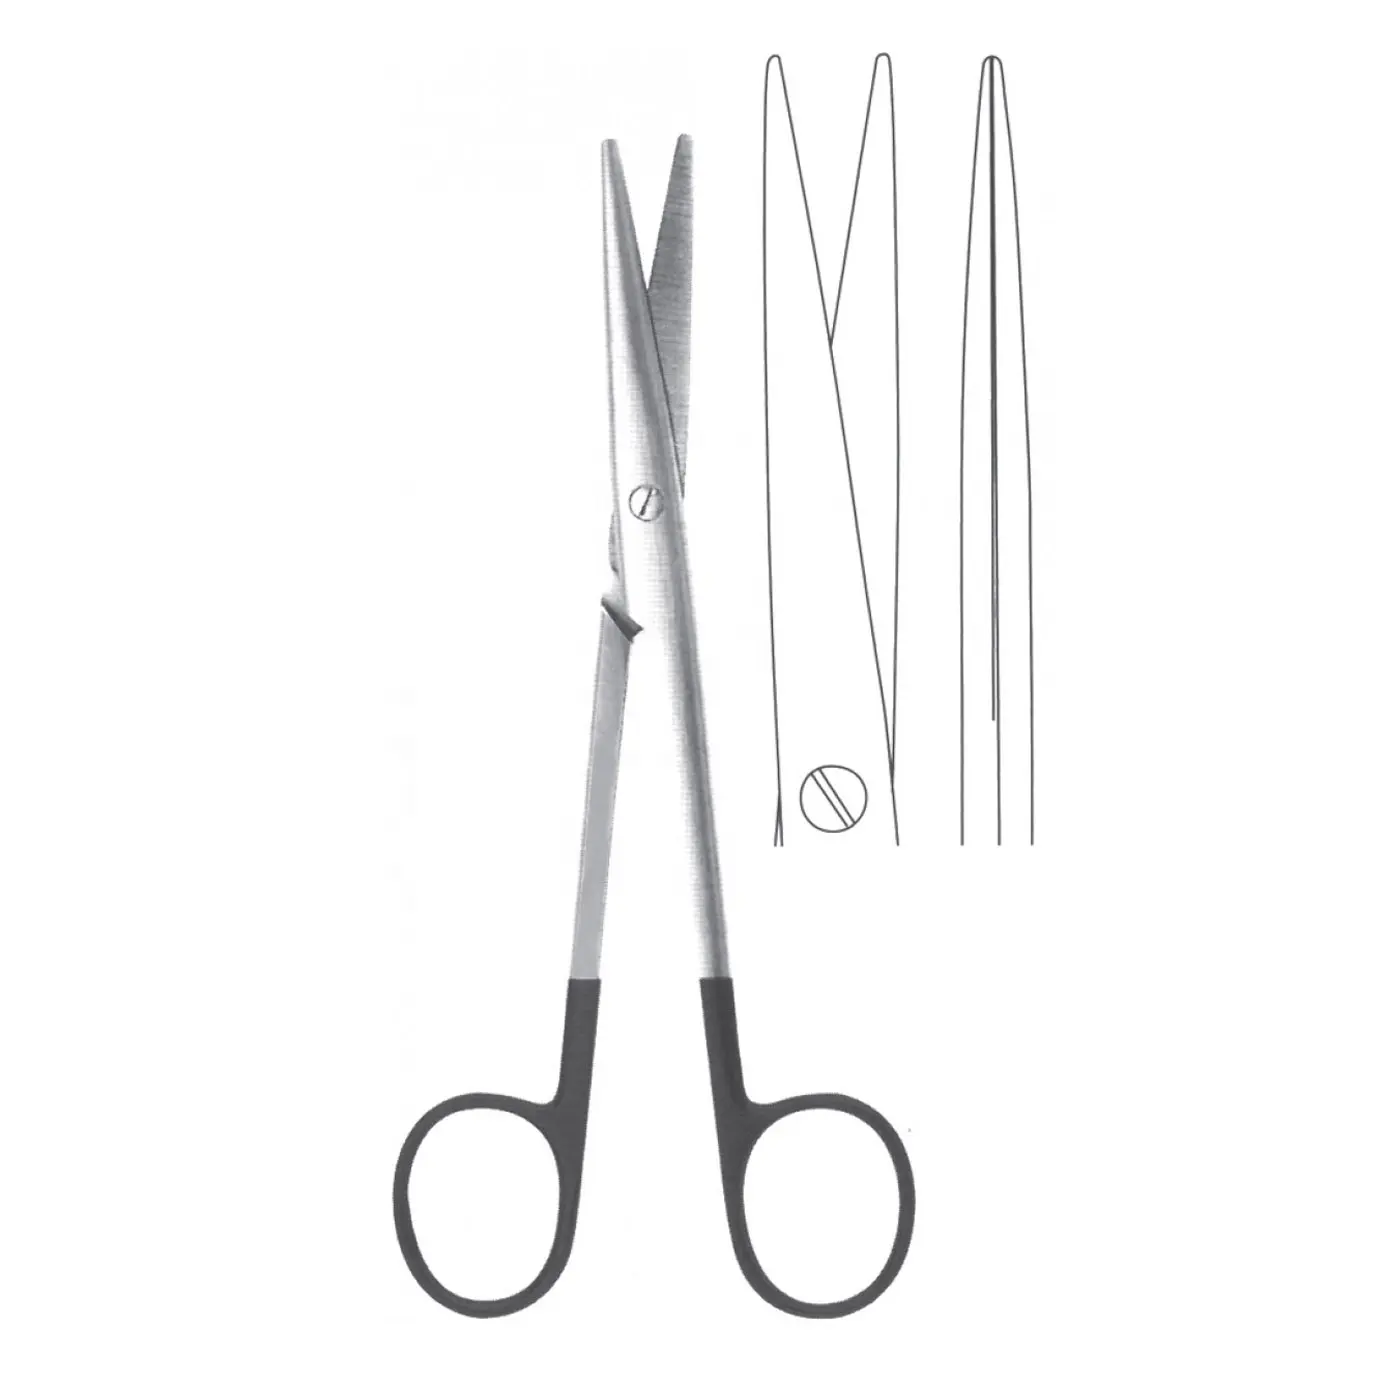 Mayo Lexer Scissor Blunt Blunt - Supercut - Stainless Steel/ Surgical Instruments BY SIGAL MEDCO